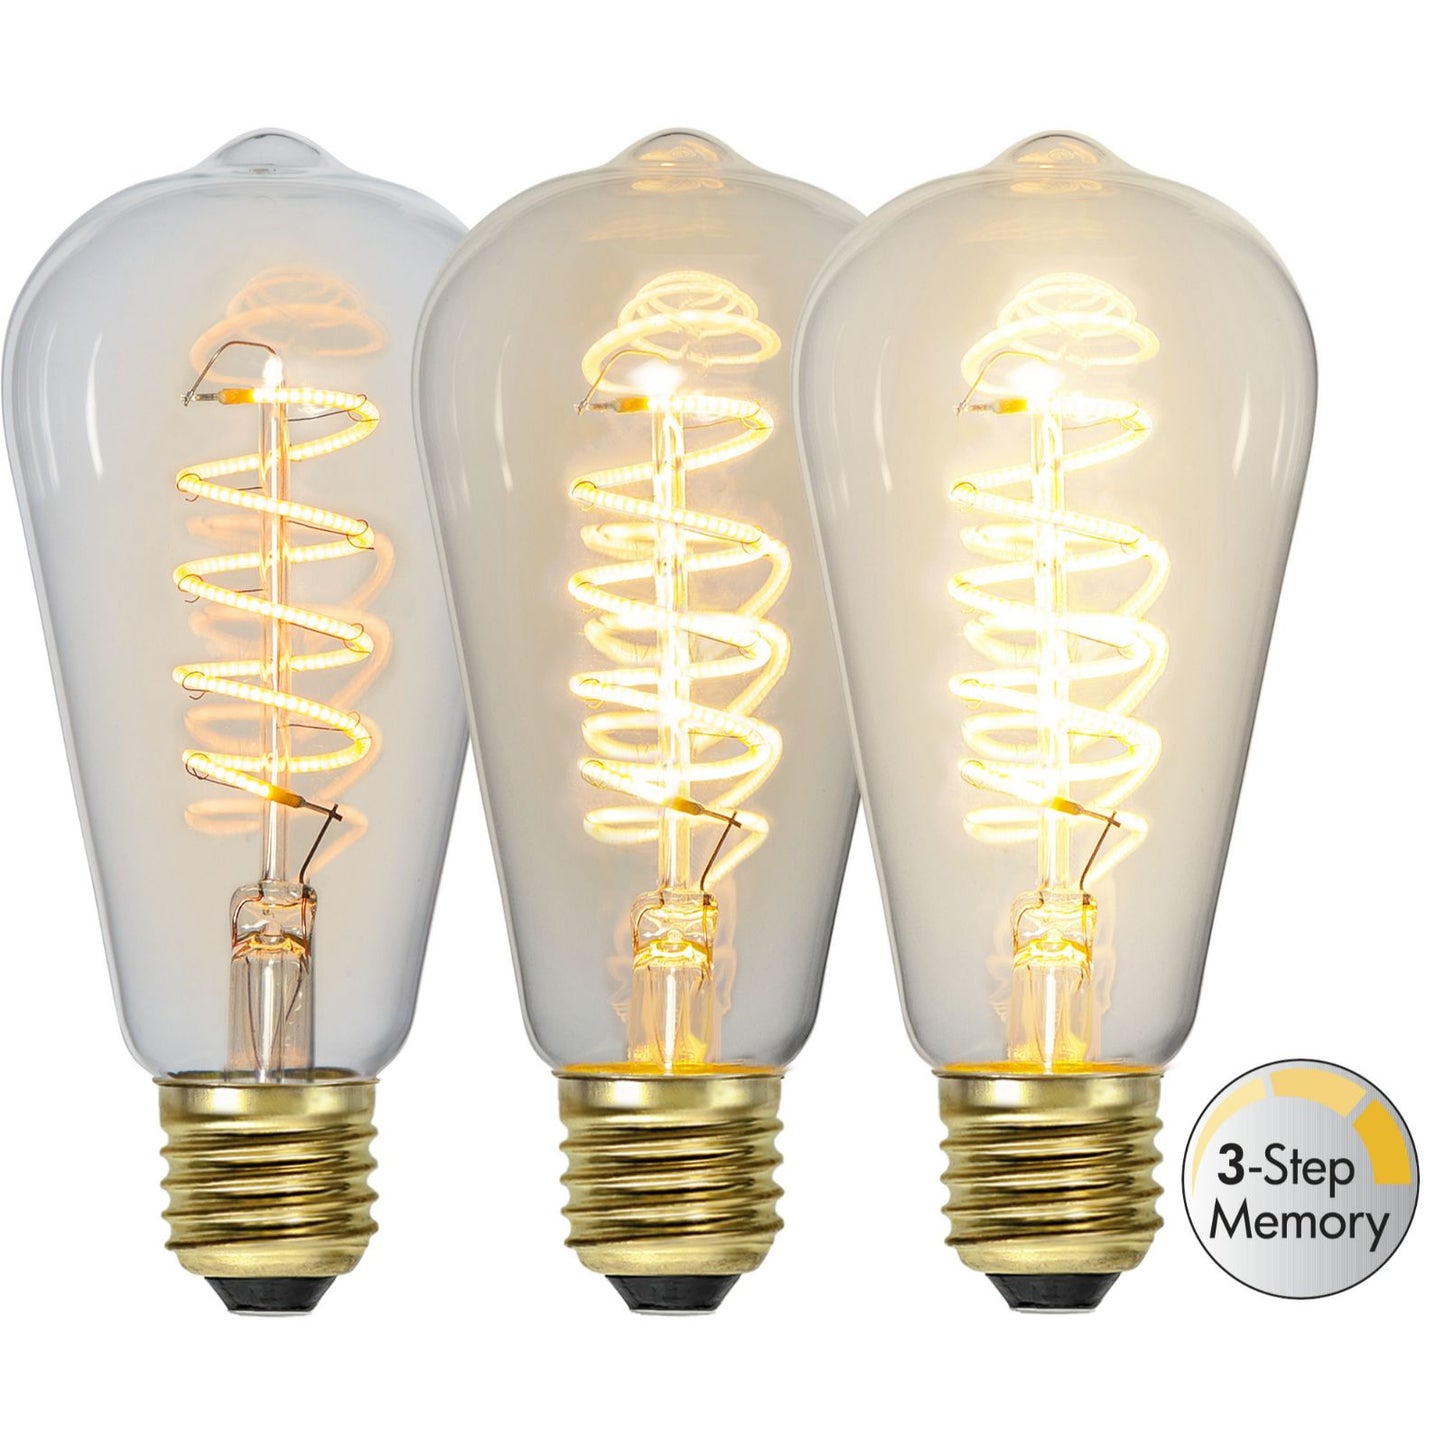 led-lampa-e27-st64-decoled-spiral-clear-3-step-memory-354-90-1